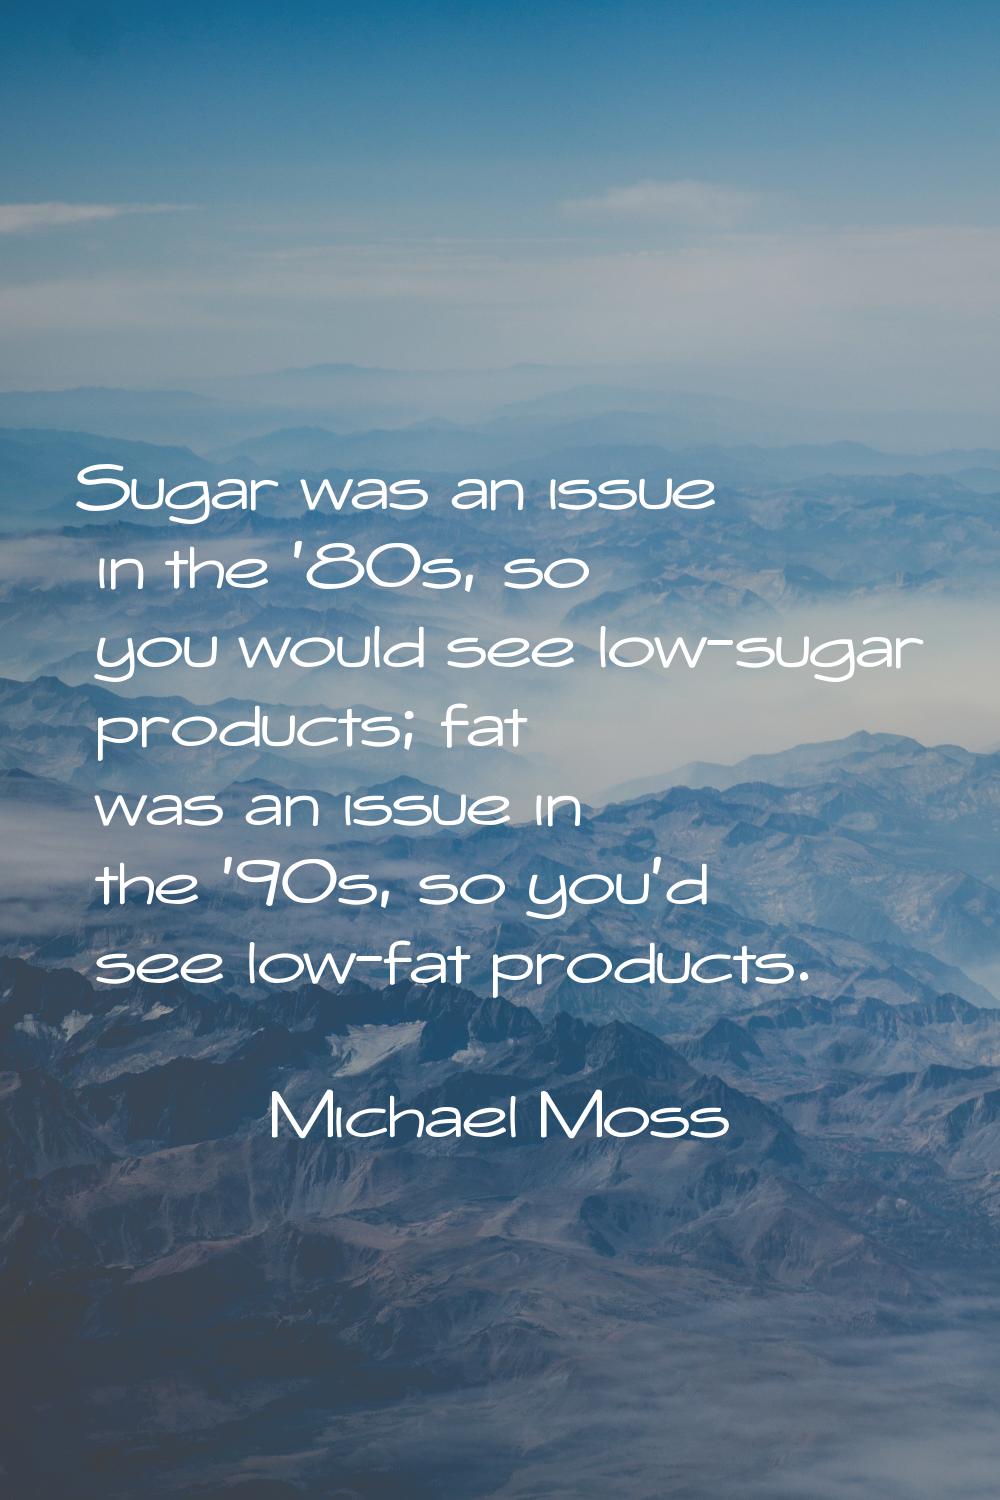 Sugar was an issue in the '80s, so you would see low-sugar products; fat was an issue in the '90s, 